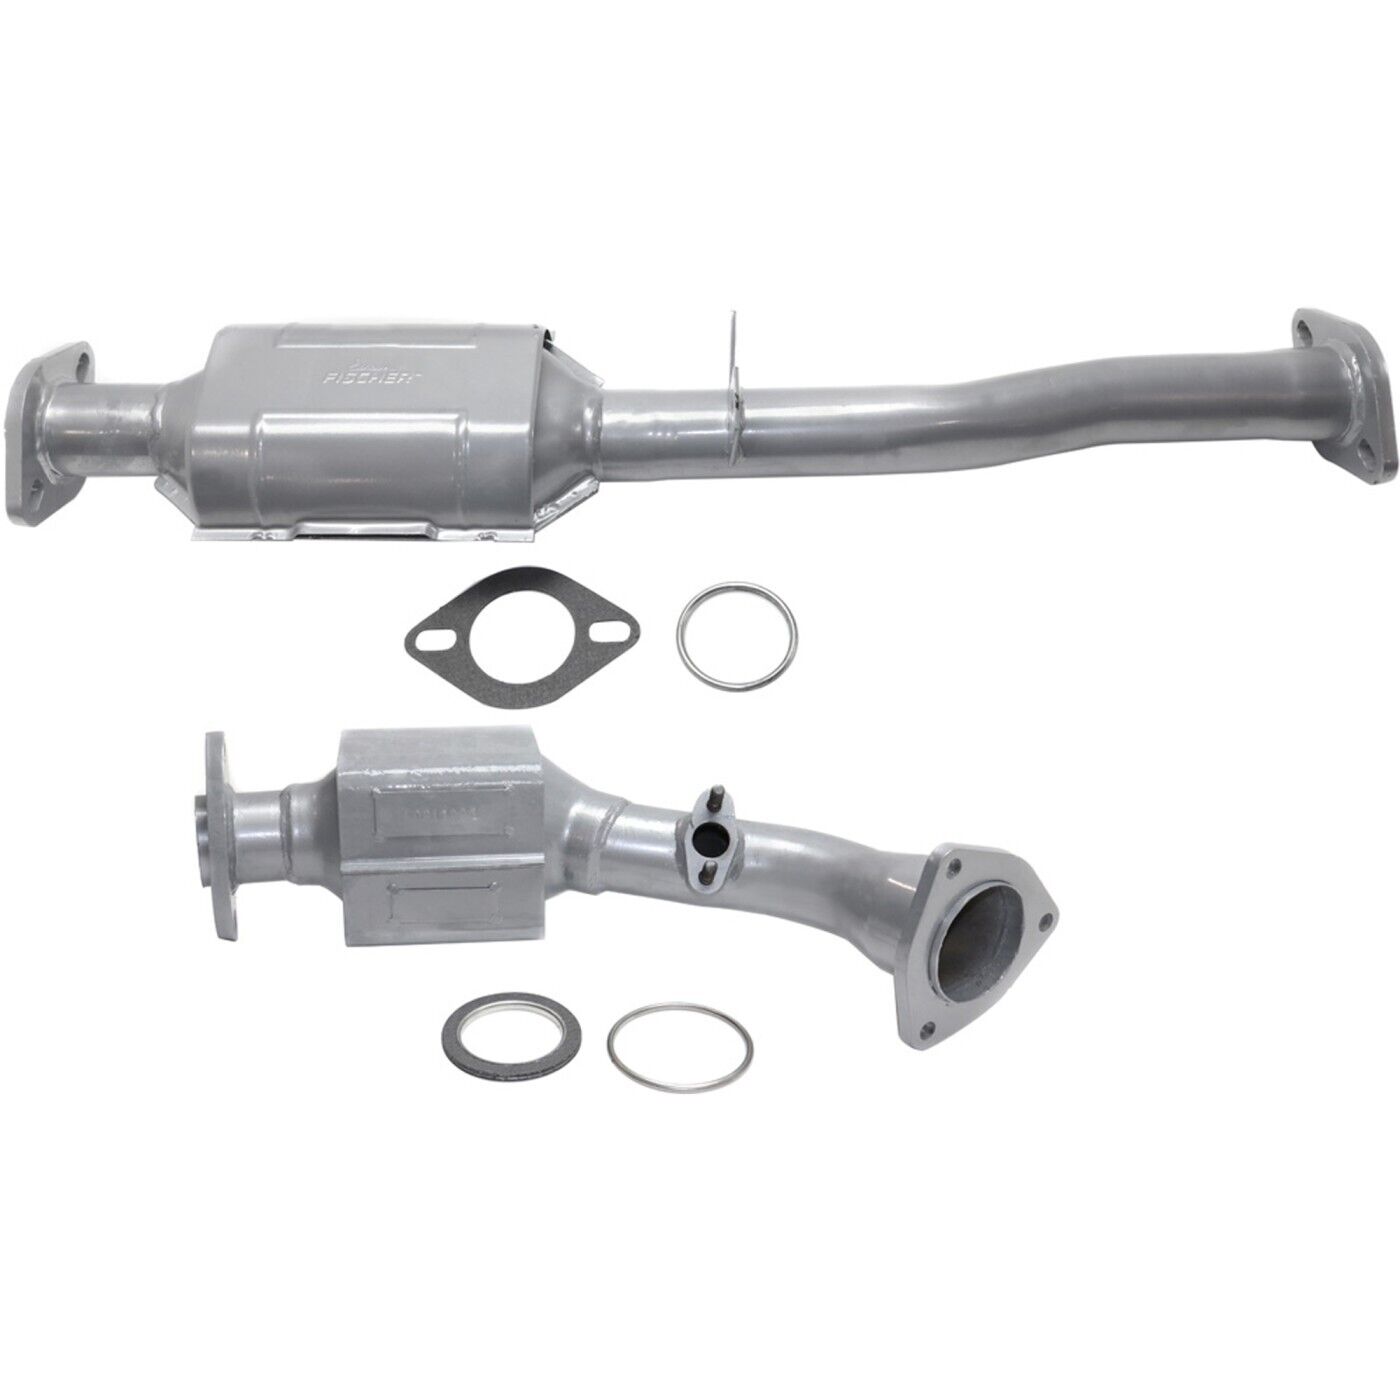 Catalytic Converter Front and Rear 46-State Legal For 3.4L 2000-04 Toyota Tacoma